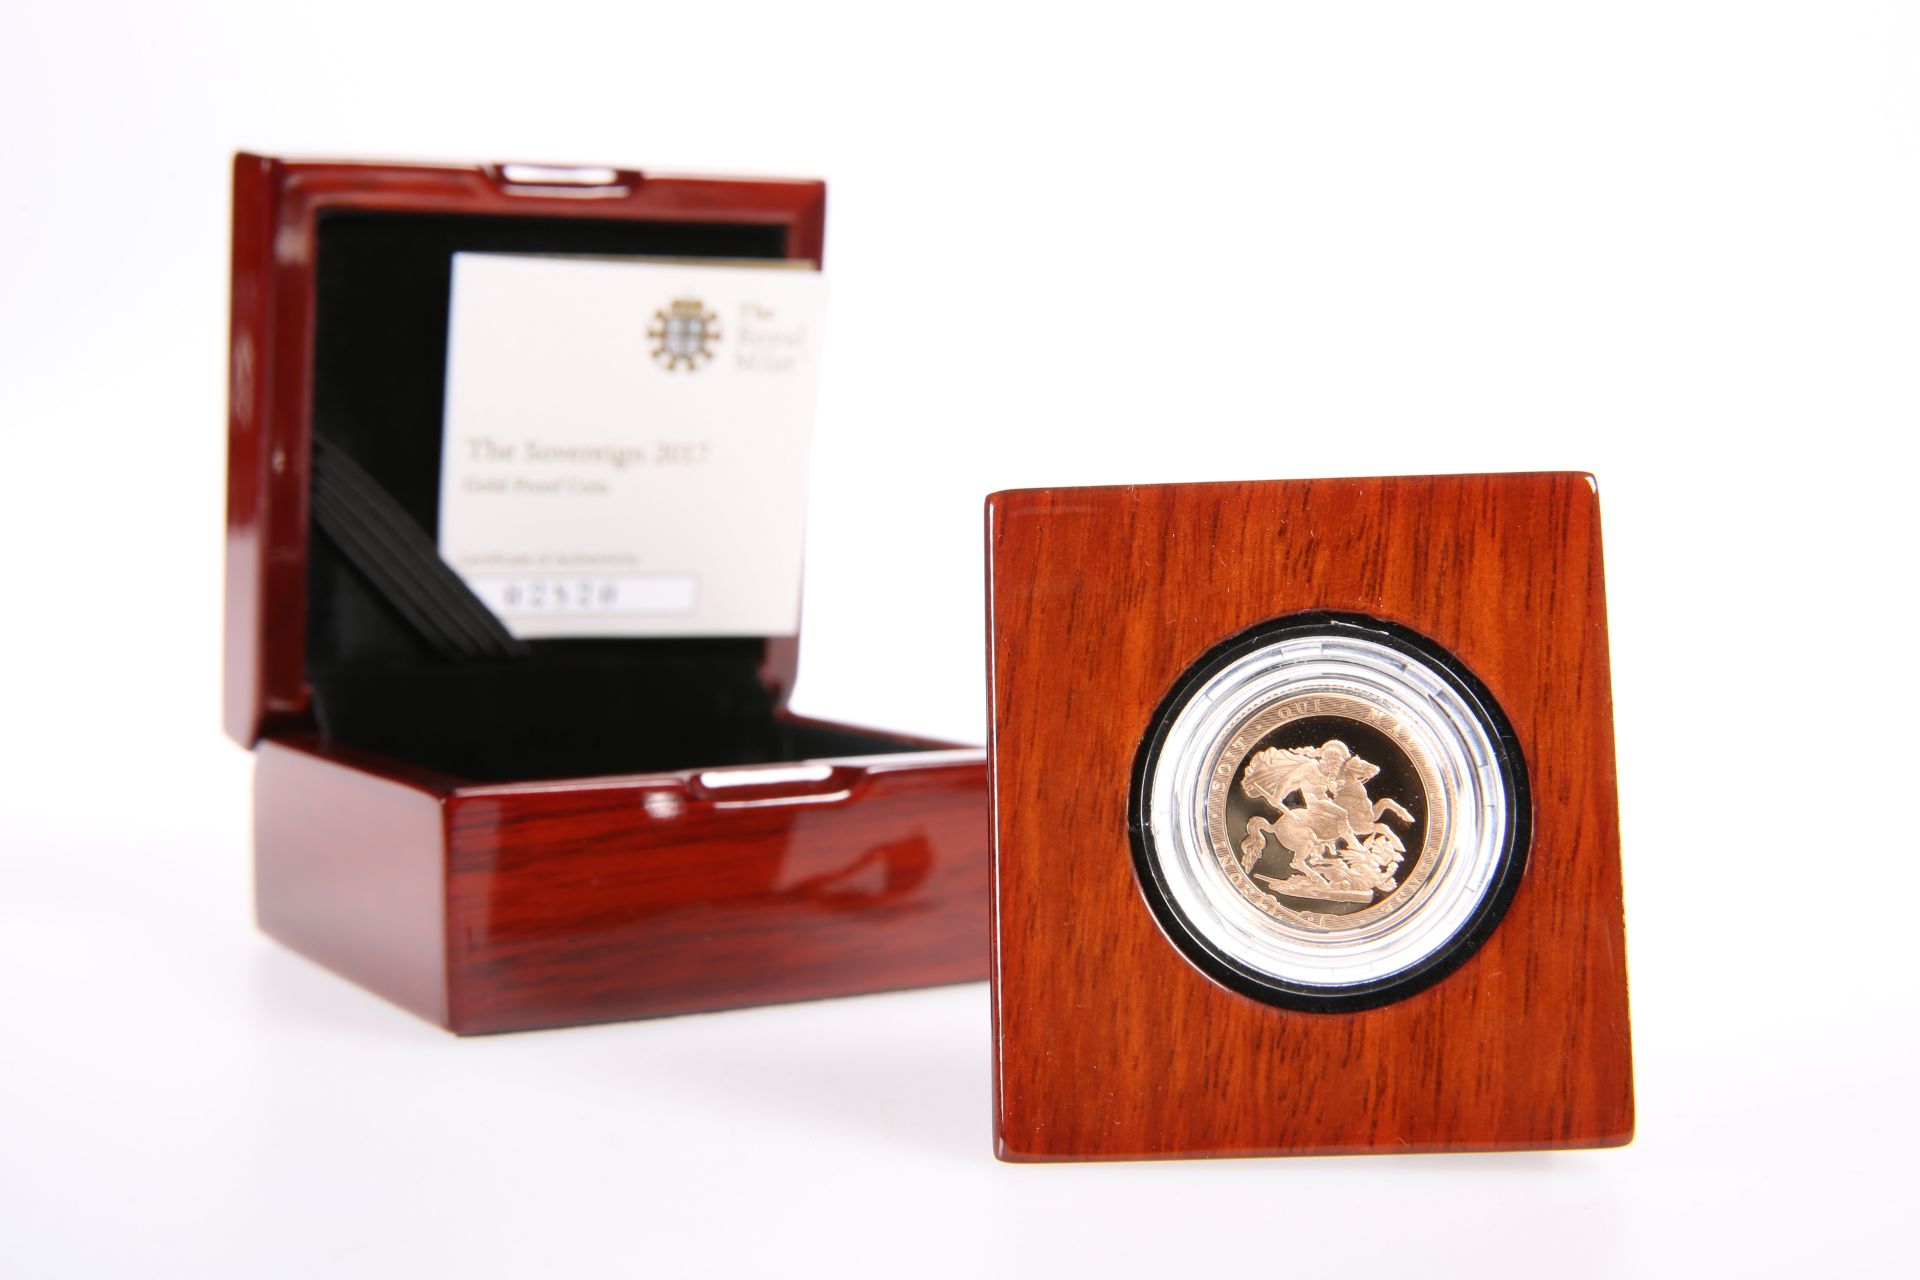 A GOLD PROOF FULL SOVEREIGN, 2017, in Royal Mint box with COA no. 02820